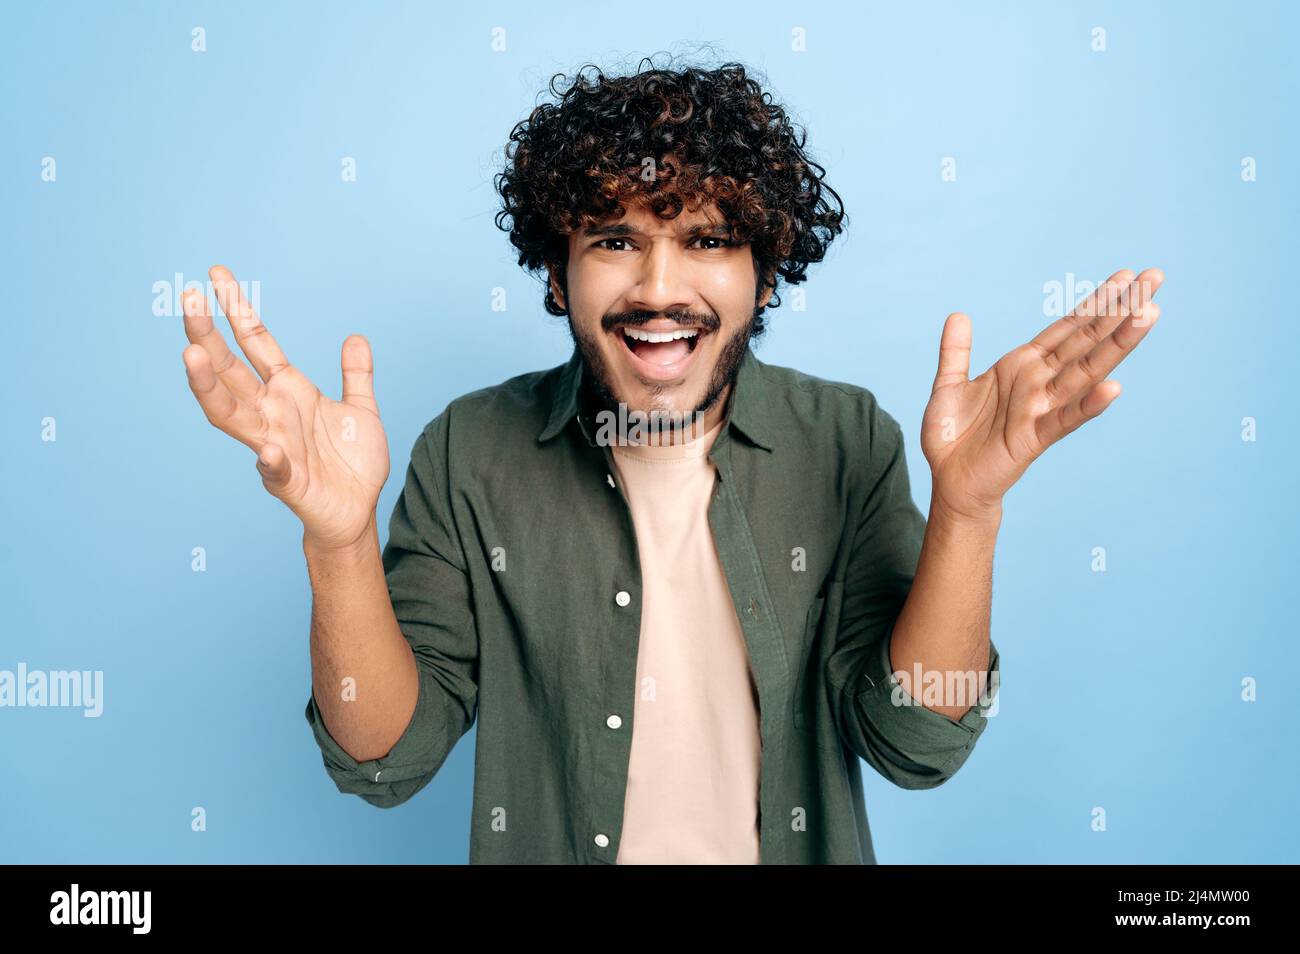 Discouraged Indian or Arabian confused curly-haired young man, emotionally gesturing with his hands, looking inquiringly at the camera, standing on an isolated blue background Stock Photo